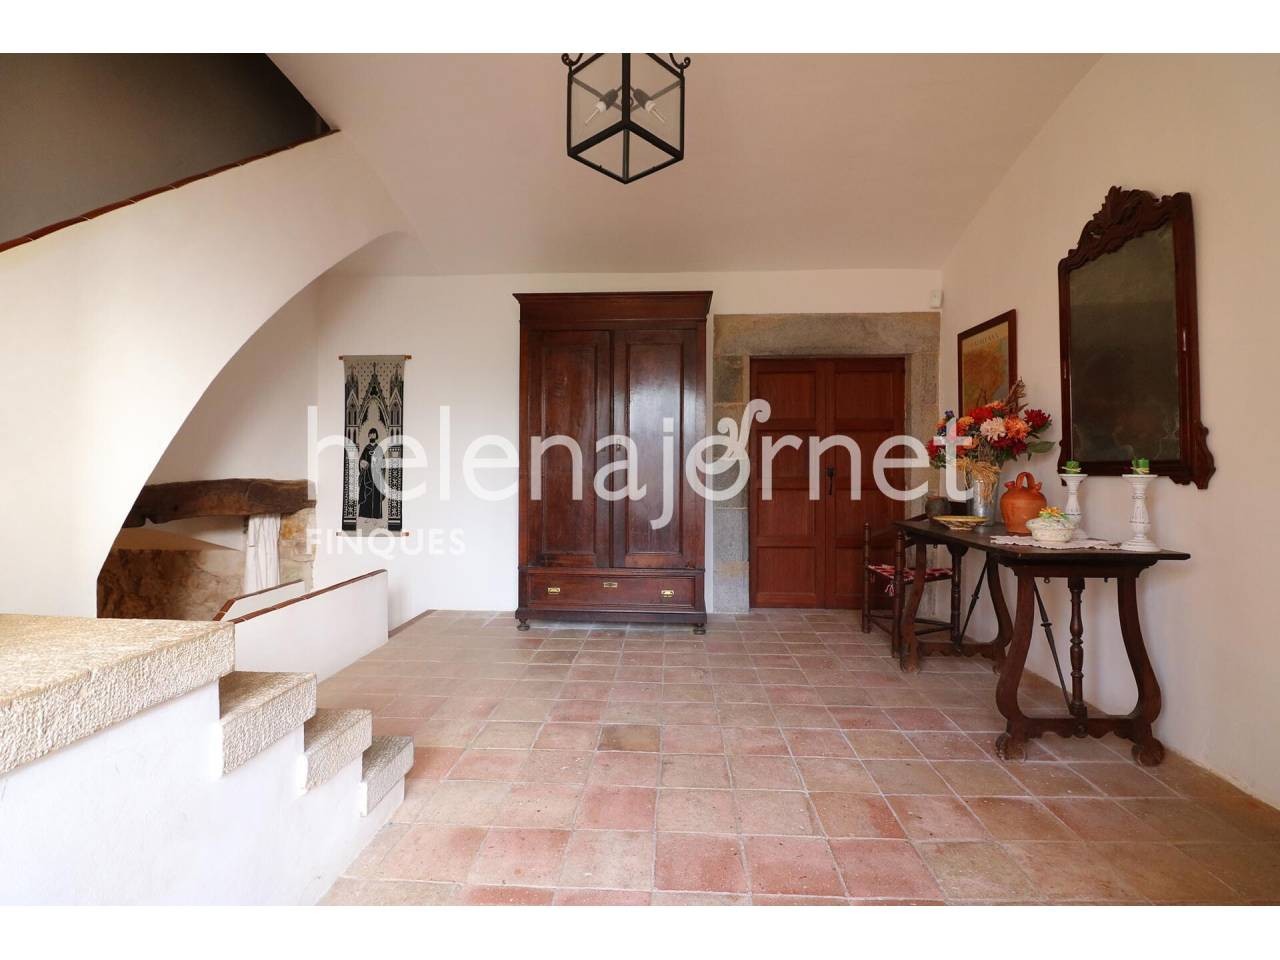 Excellent rustic estate with a renewed 563 m2 farmhouse and 4.8 hectares of land. - 2504